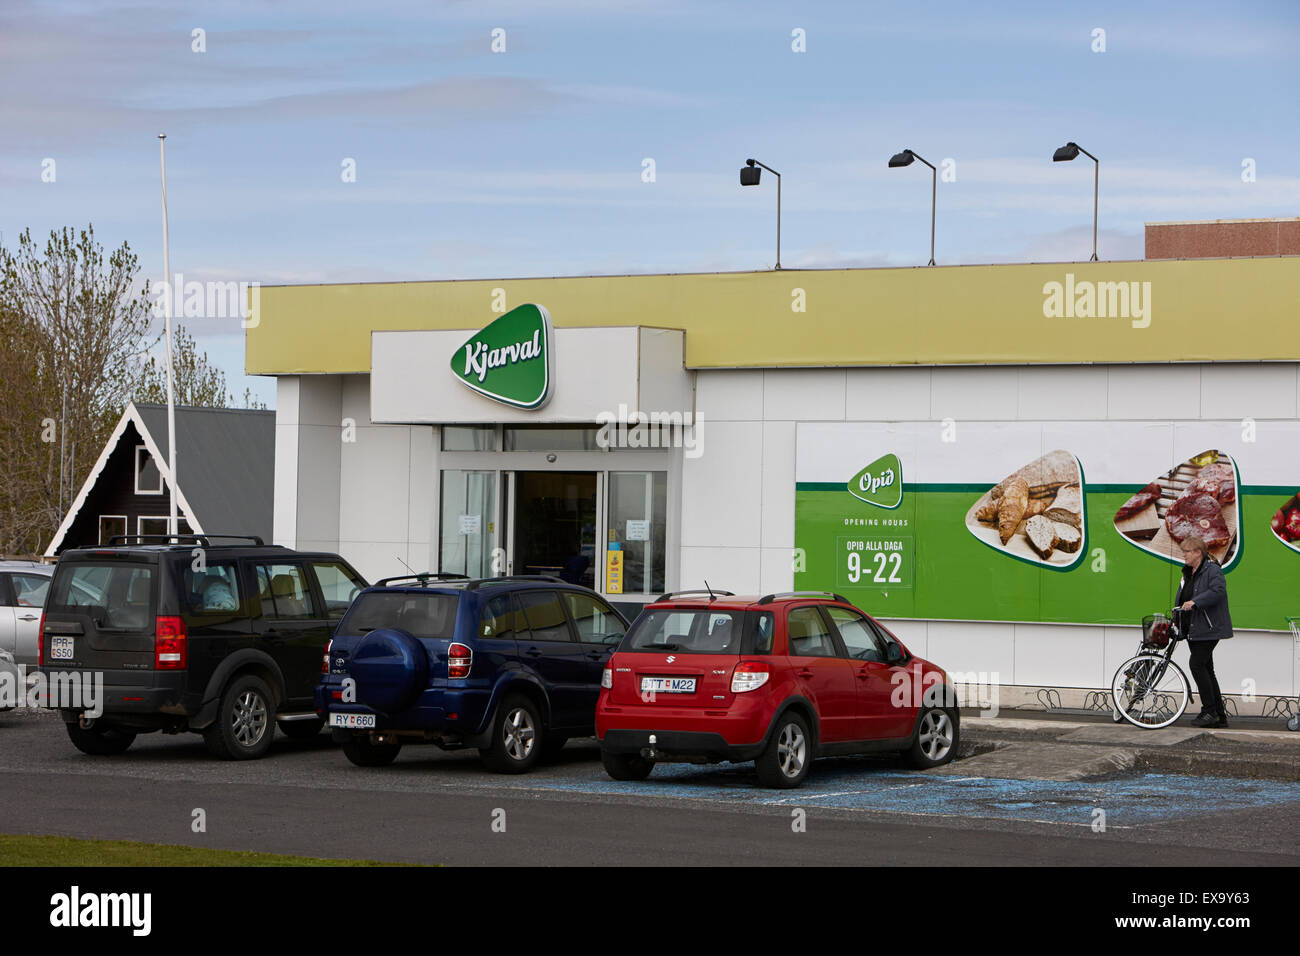 kjarval small grocery store chain in Iceland Stock Photo